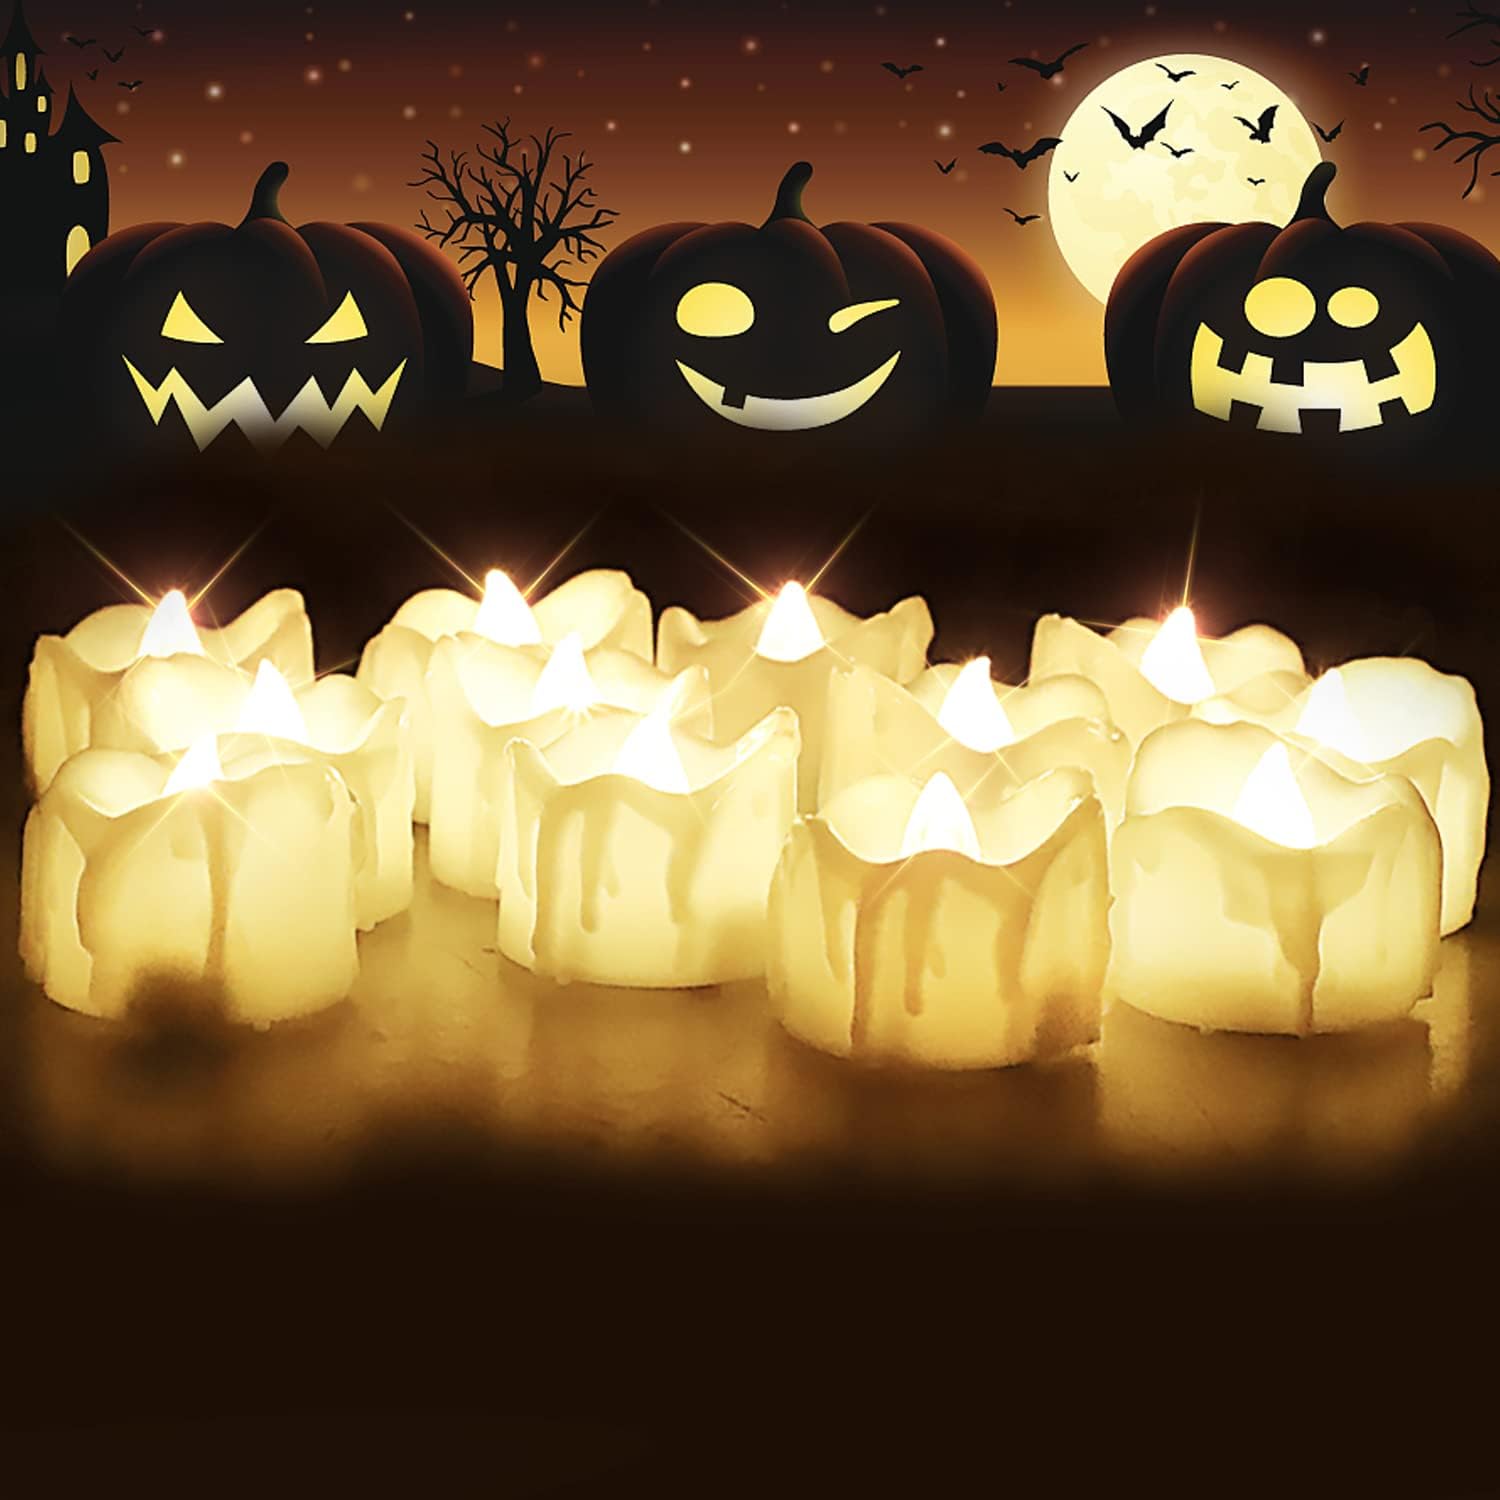 12pcs Timer Tea Lights, Flameless Flickering Battery Operated, Auto-On 6 Hours and Off 18 Hours Everyday, Batteries Included